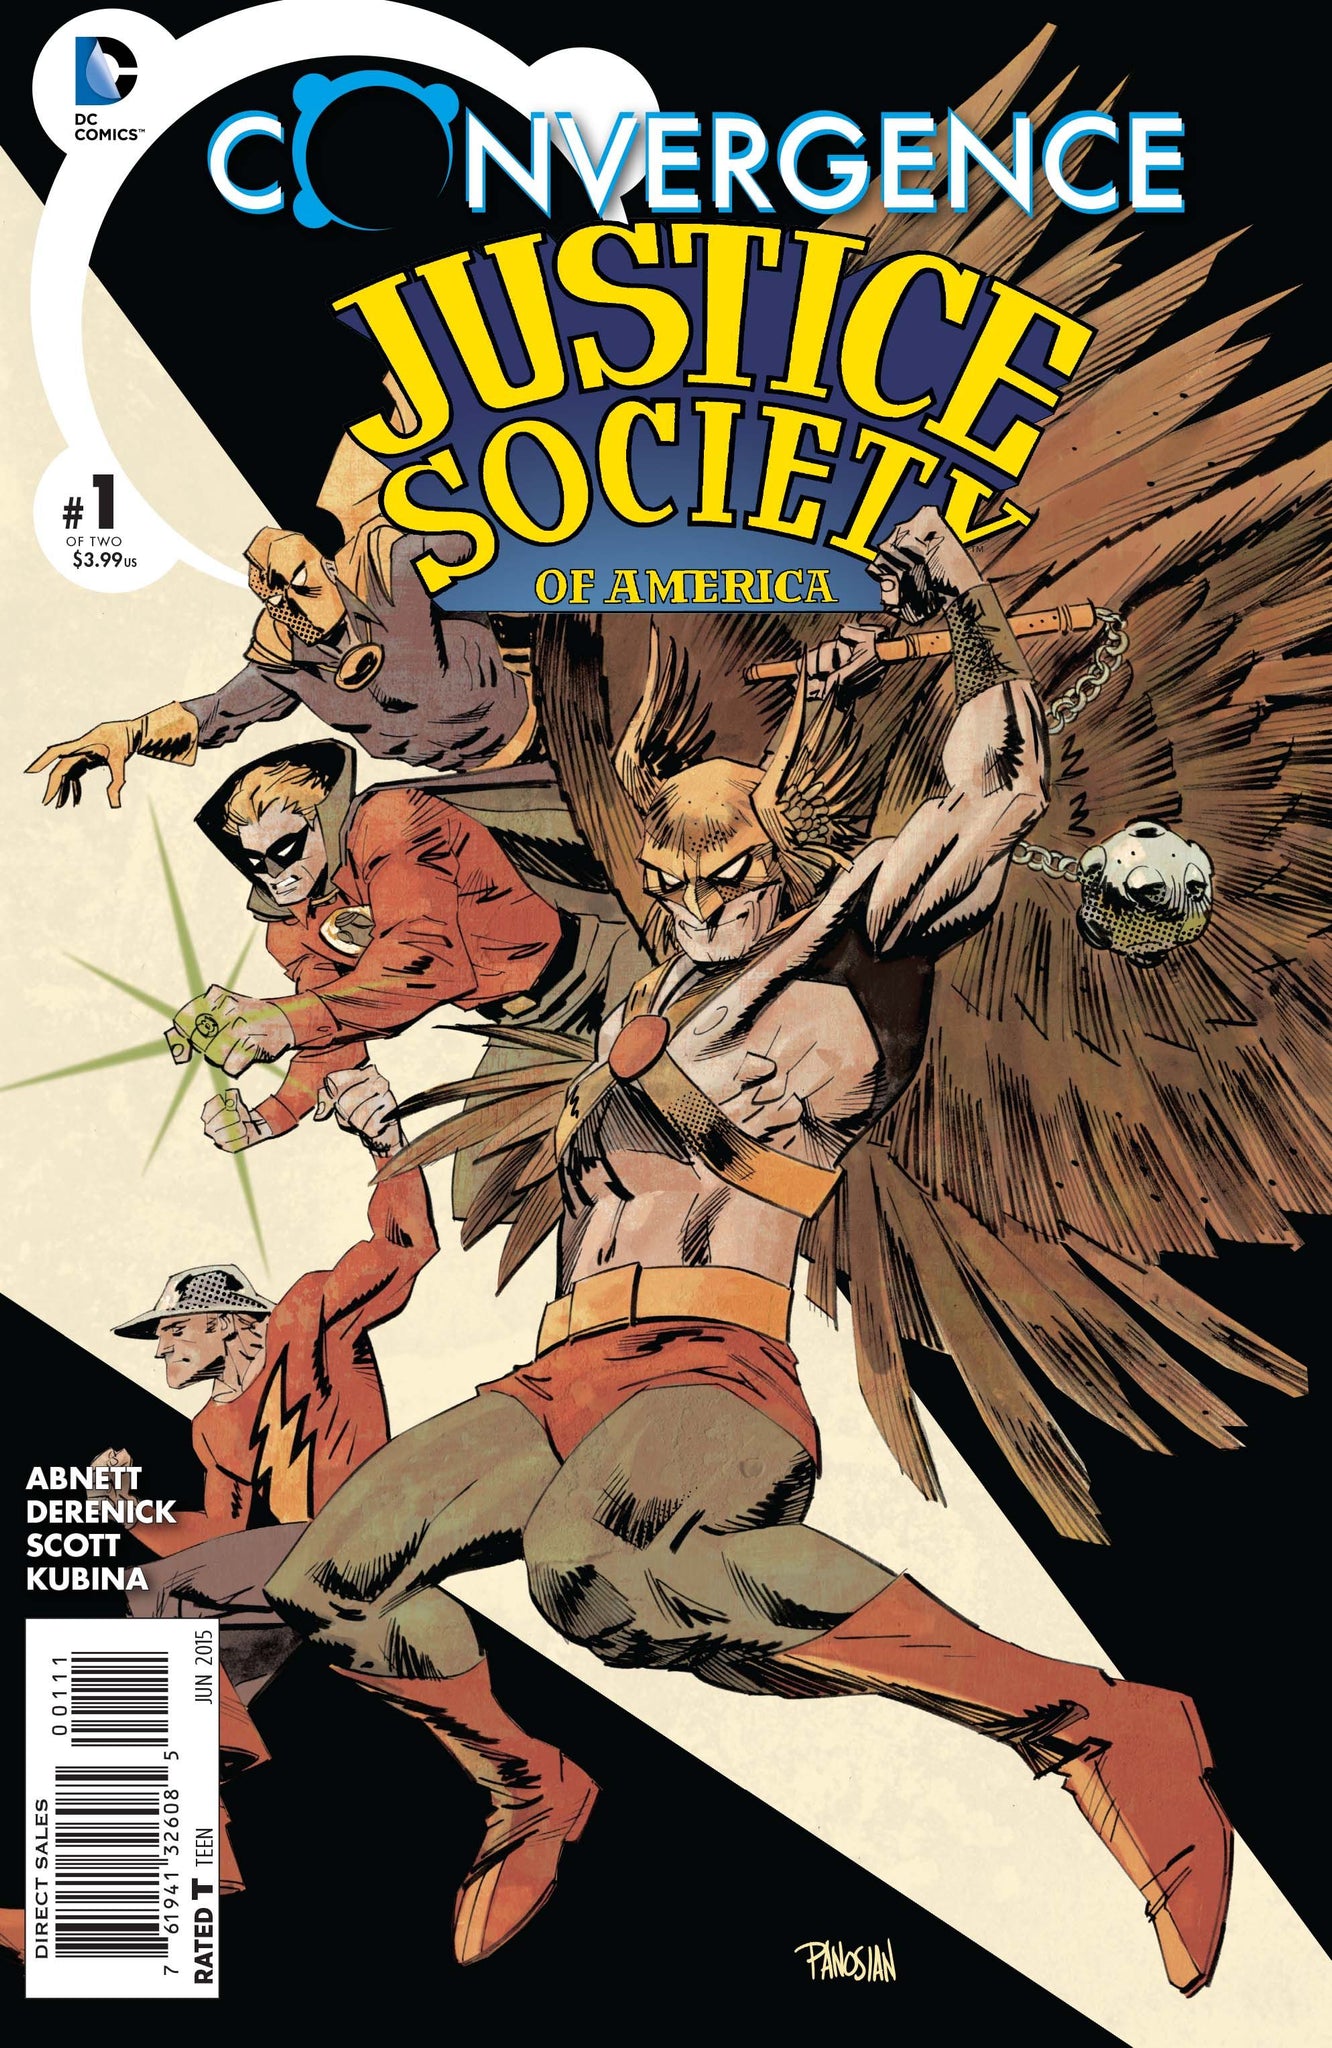 Convergence: Justice Society of America #1